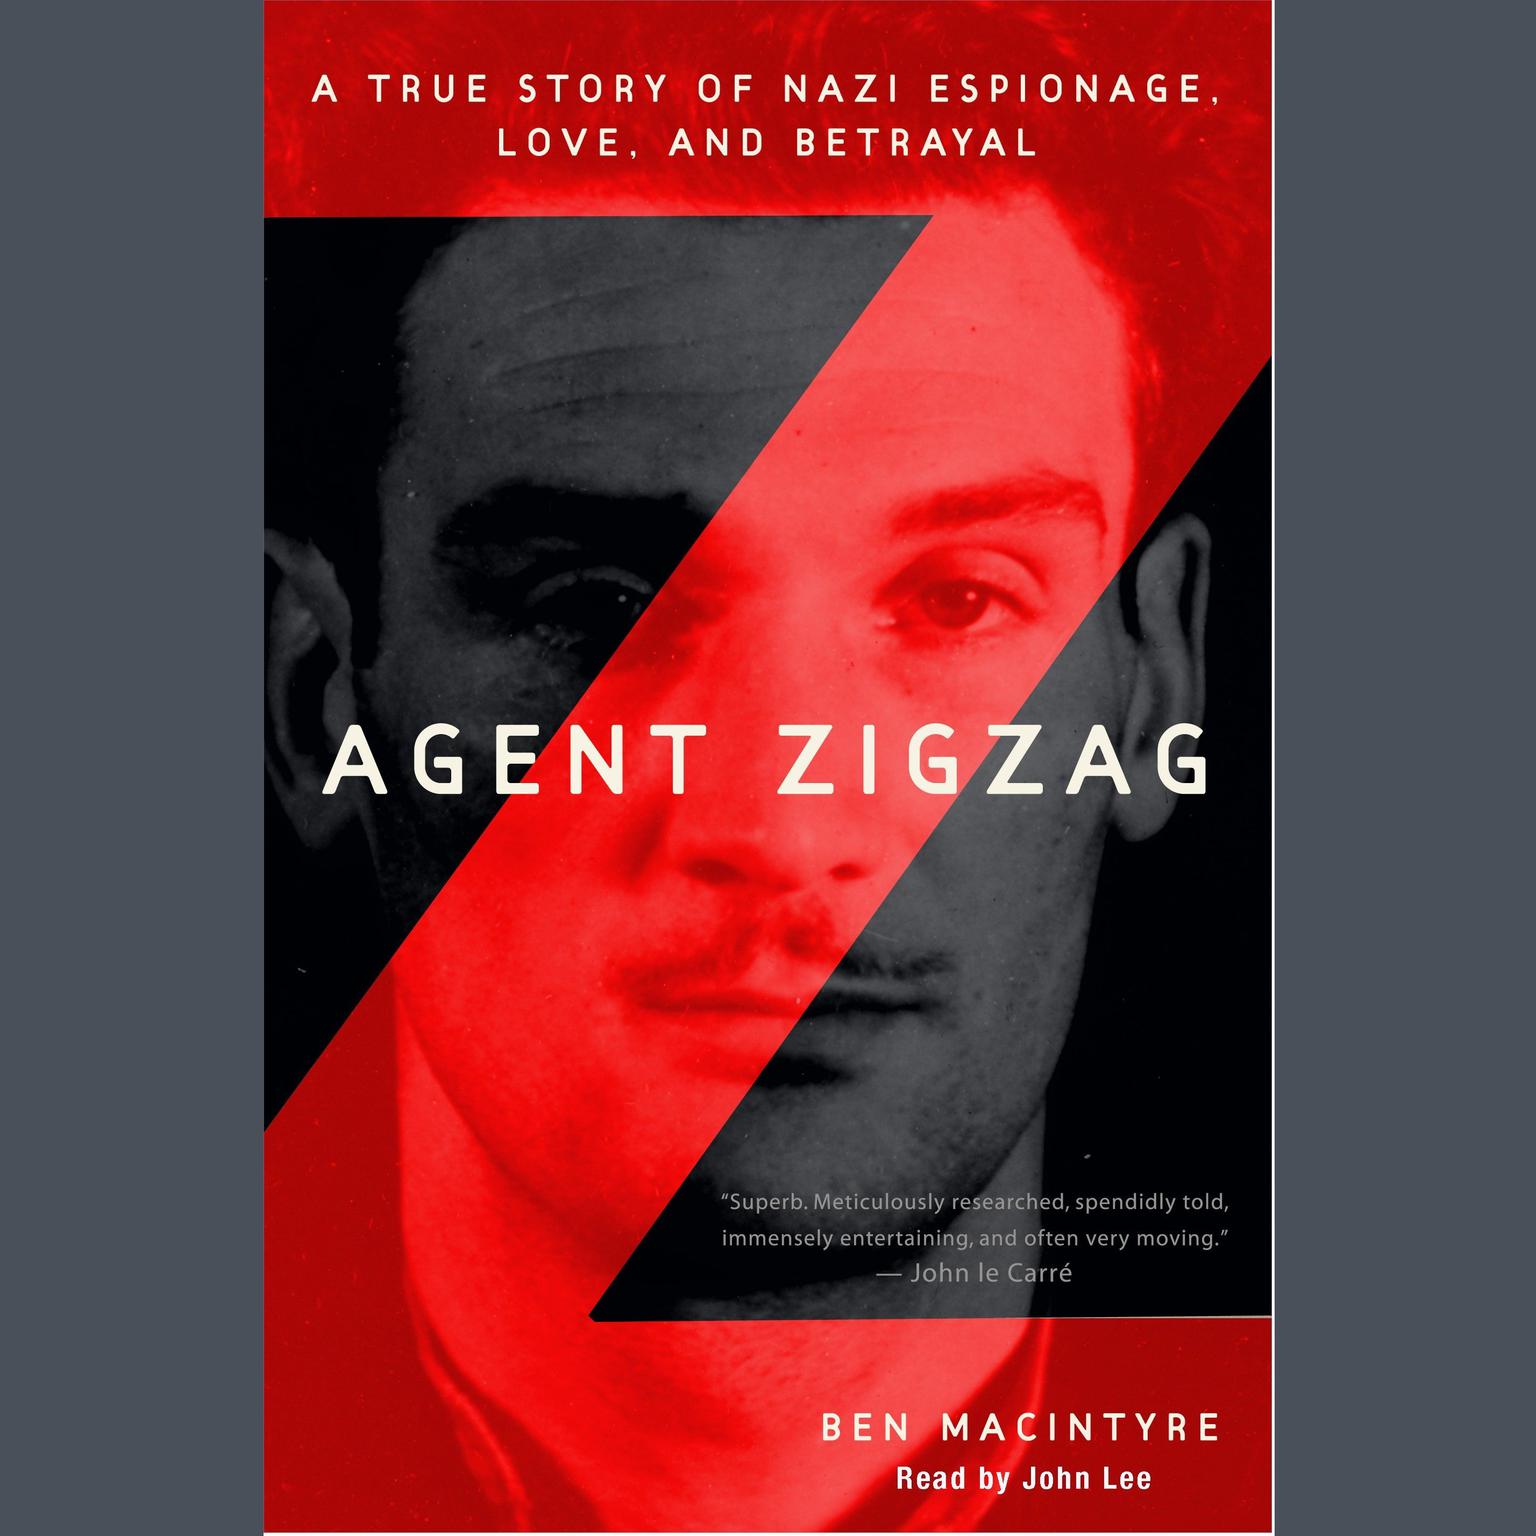 Agent Zigzag (Abridged): A True Story of Nazi Espionage, Love, and Betrayal Audiobook, by Ben Macintyre